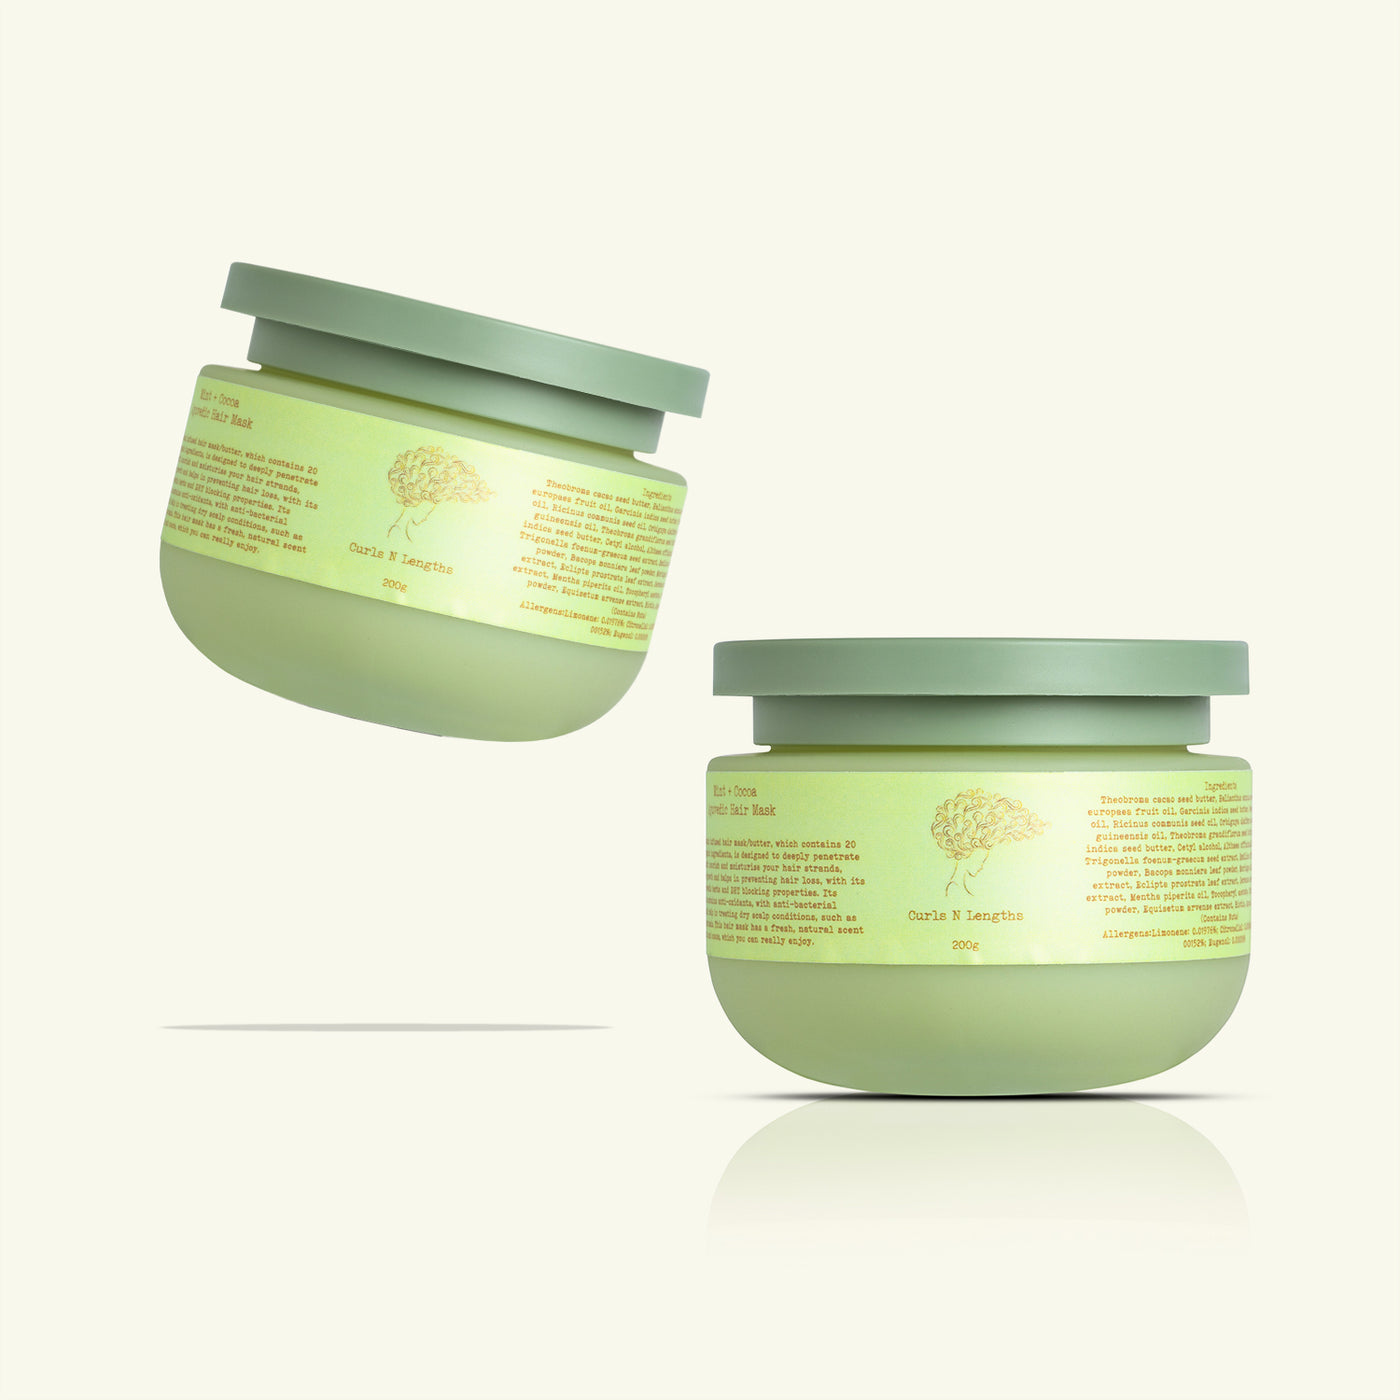 Mint and Cocoa Ayurvedic Hair Mask/Butter